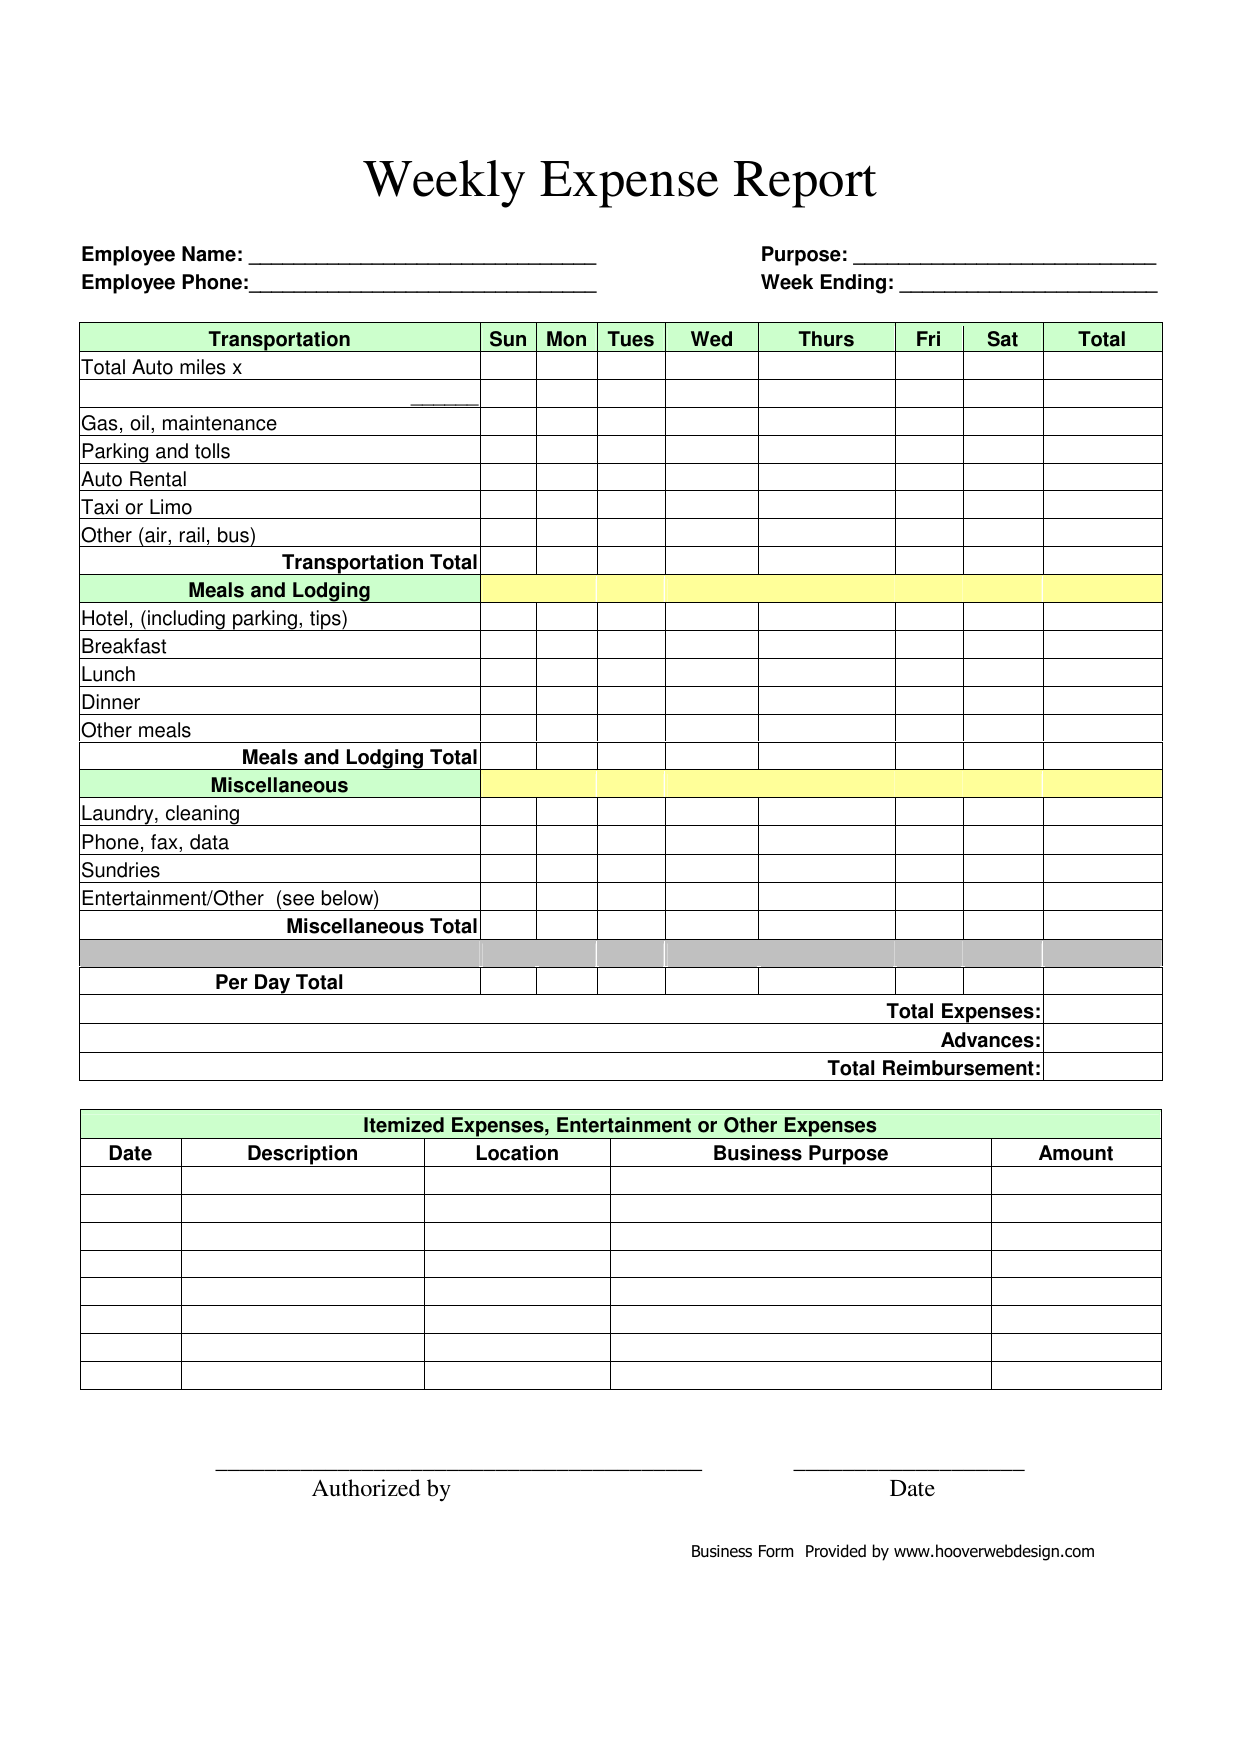 free-printable-weekly-expense-report-forms-printable-forms-free-online